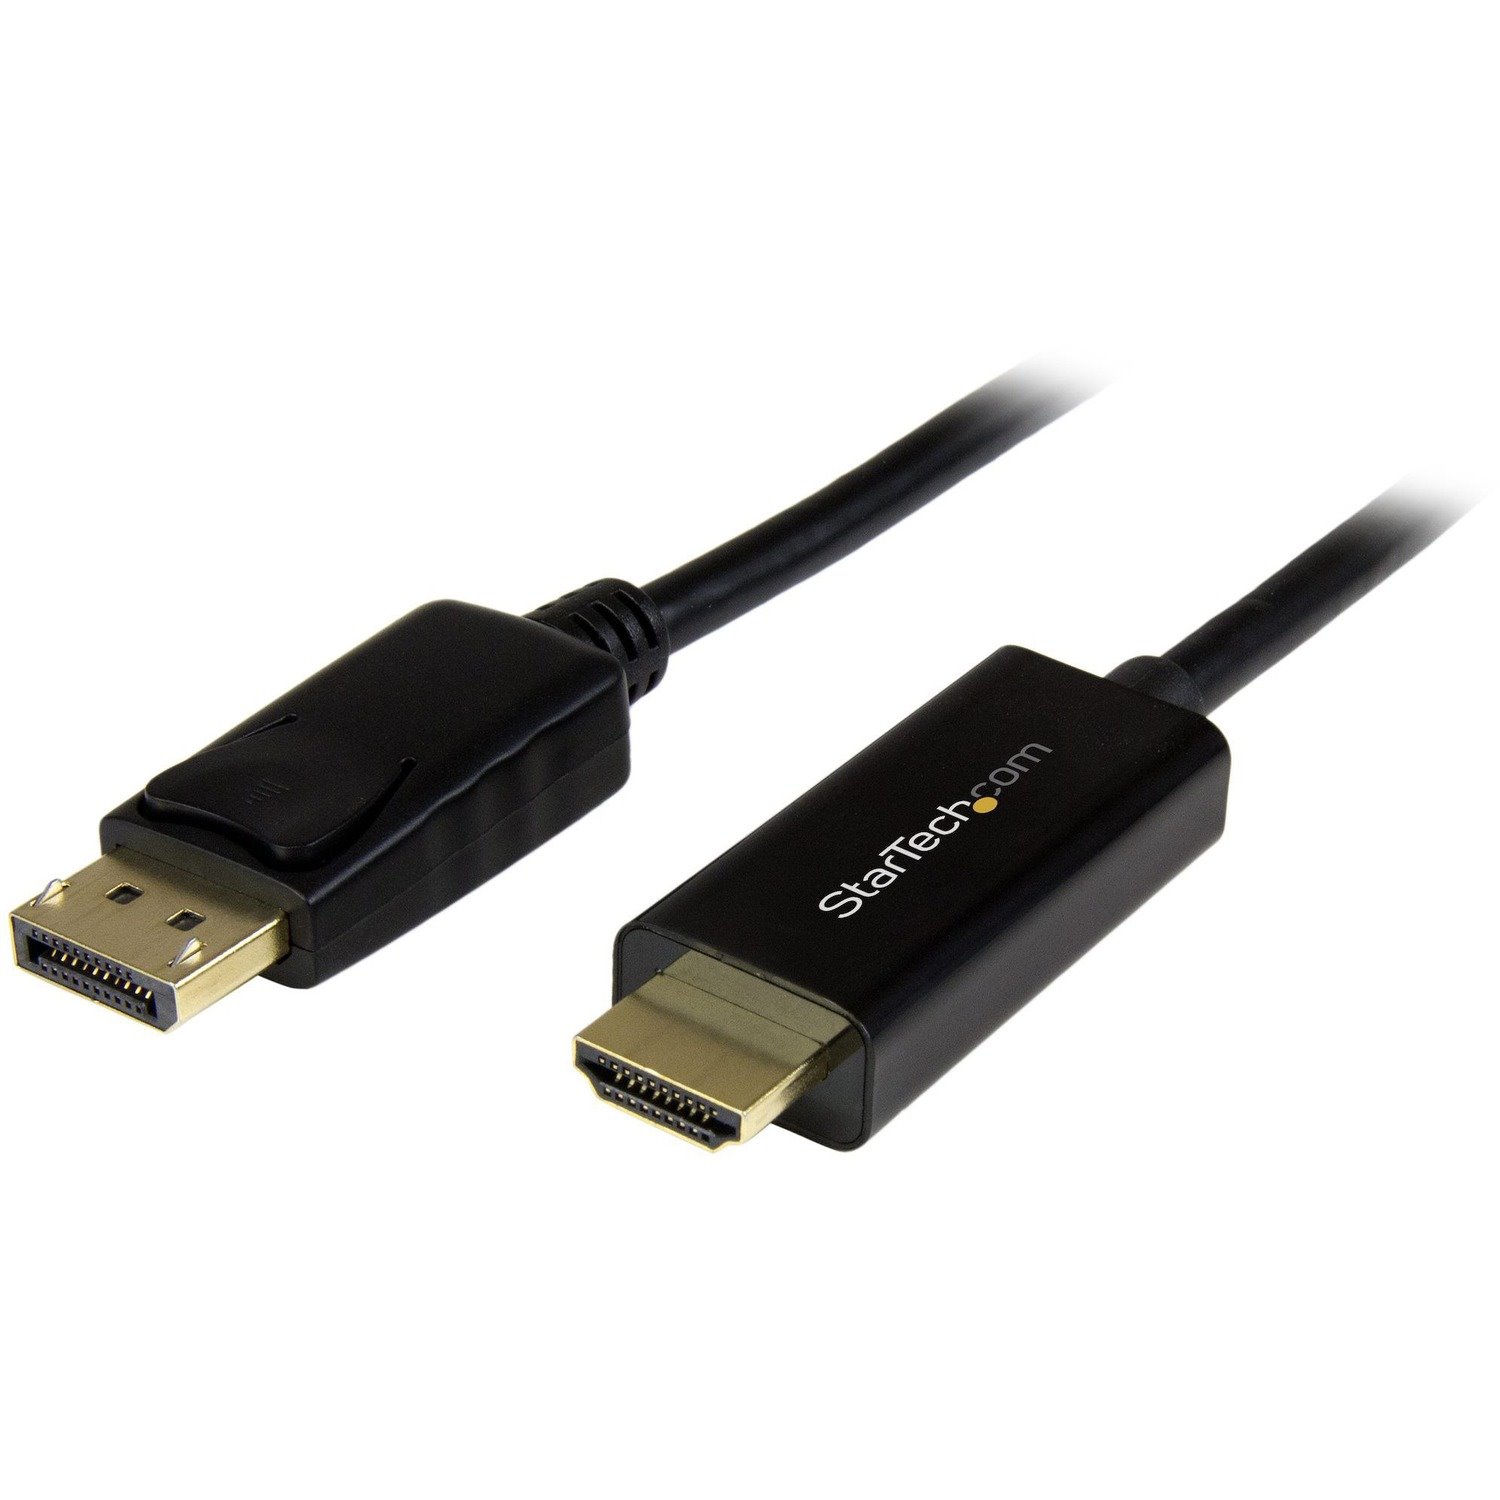 StarTech.com 10ft (3m) DisplayPort to HDMI Cable, 4K 30Hz Video, DP 1.2 to HDMI Adapter Cable Converter for HDMI Monitor/Display, Passive